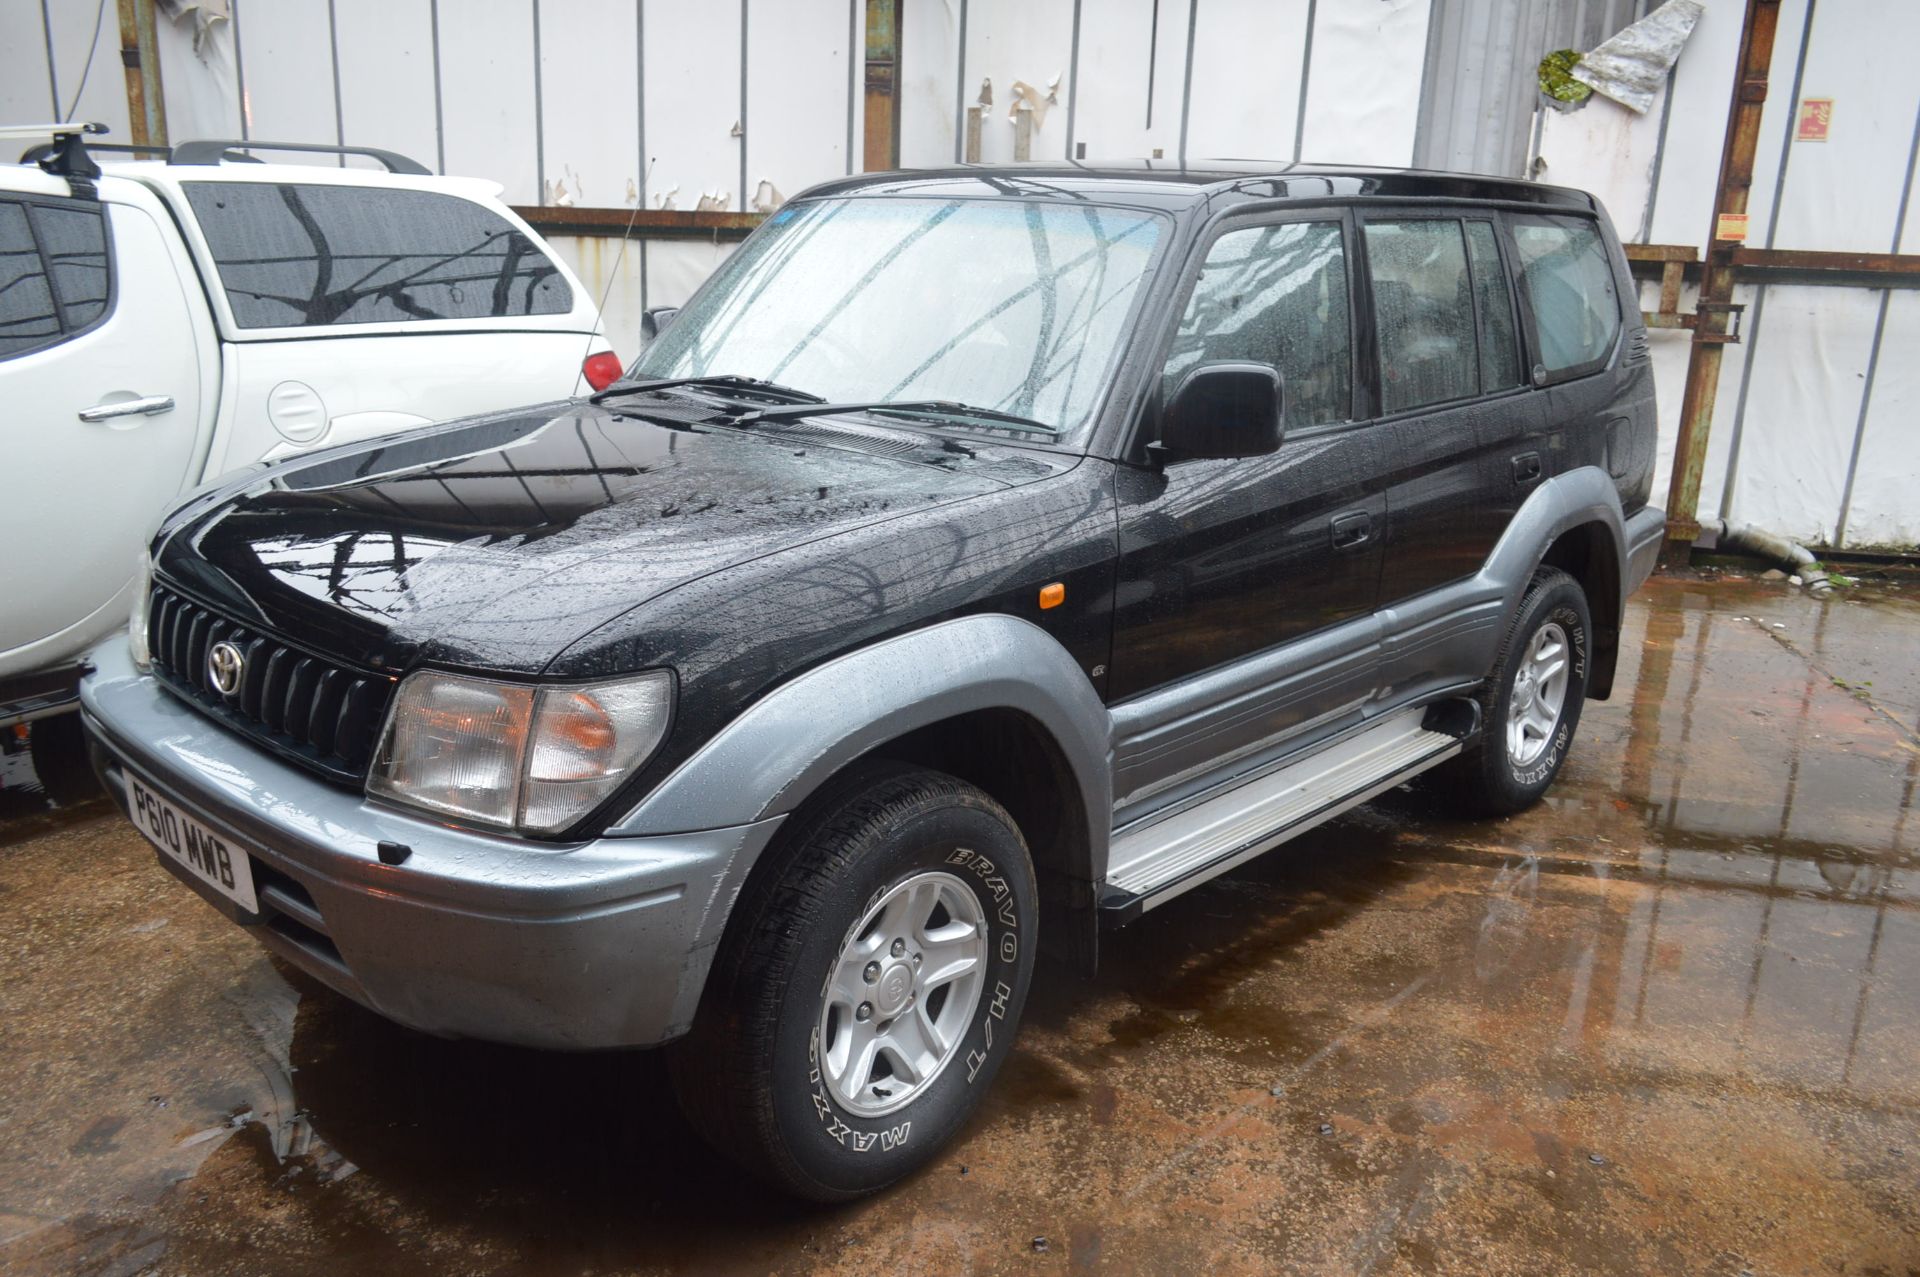 Toyota Landcrusier Diesel SUV, registration no. P610 MWB, date first registered 02/1997, tested to